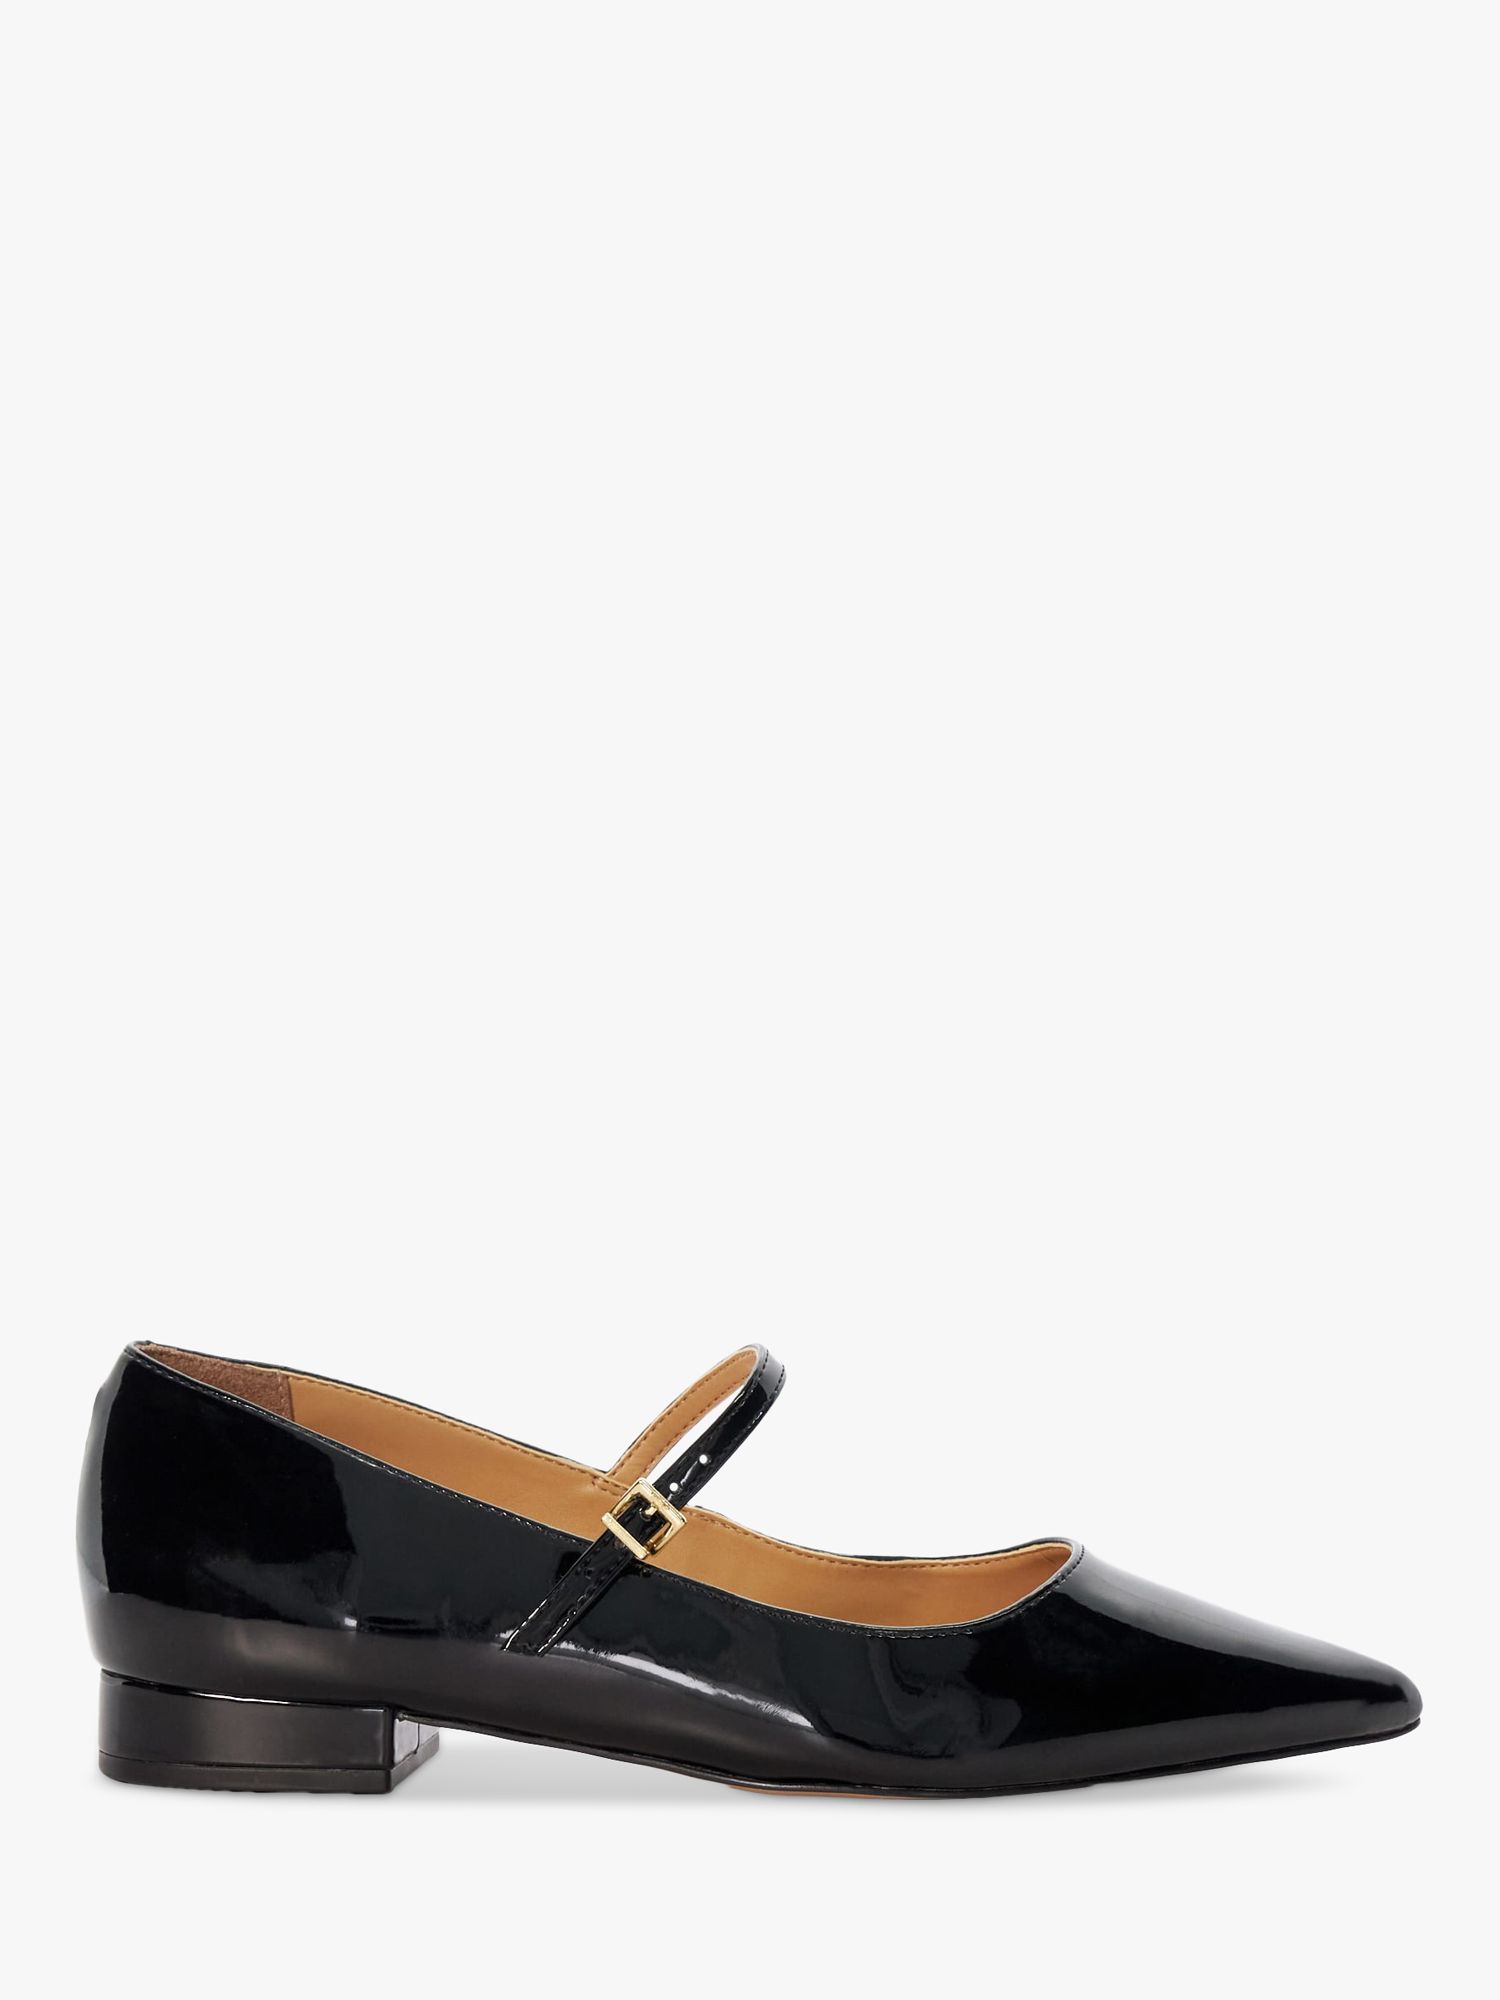 Dune Hastas Pointed Mary Jane Shoes, Black at John Lewis & Partners